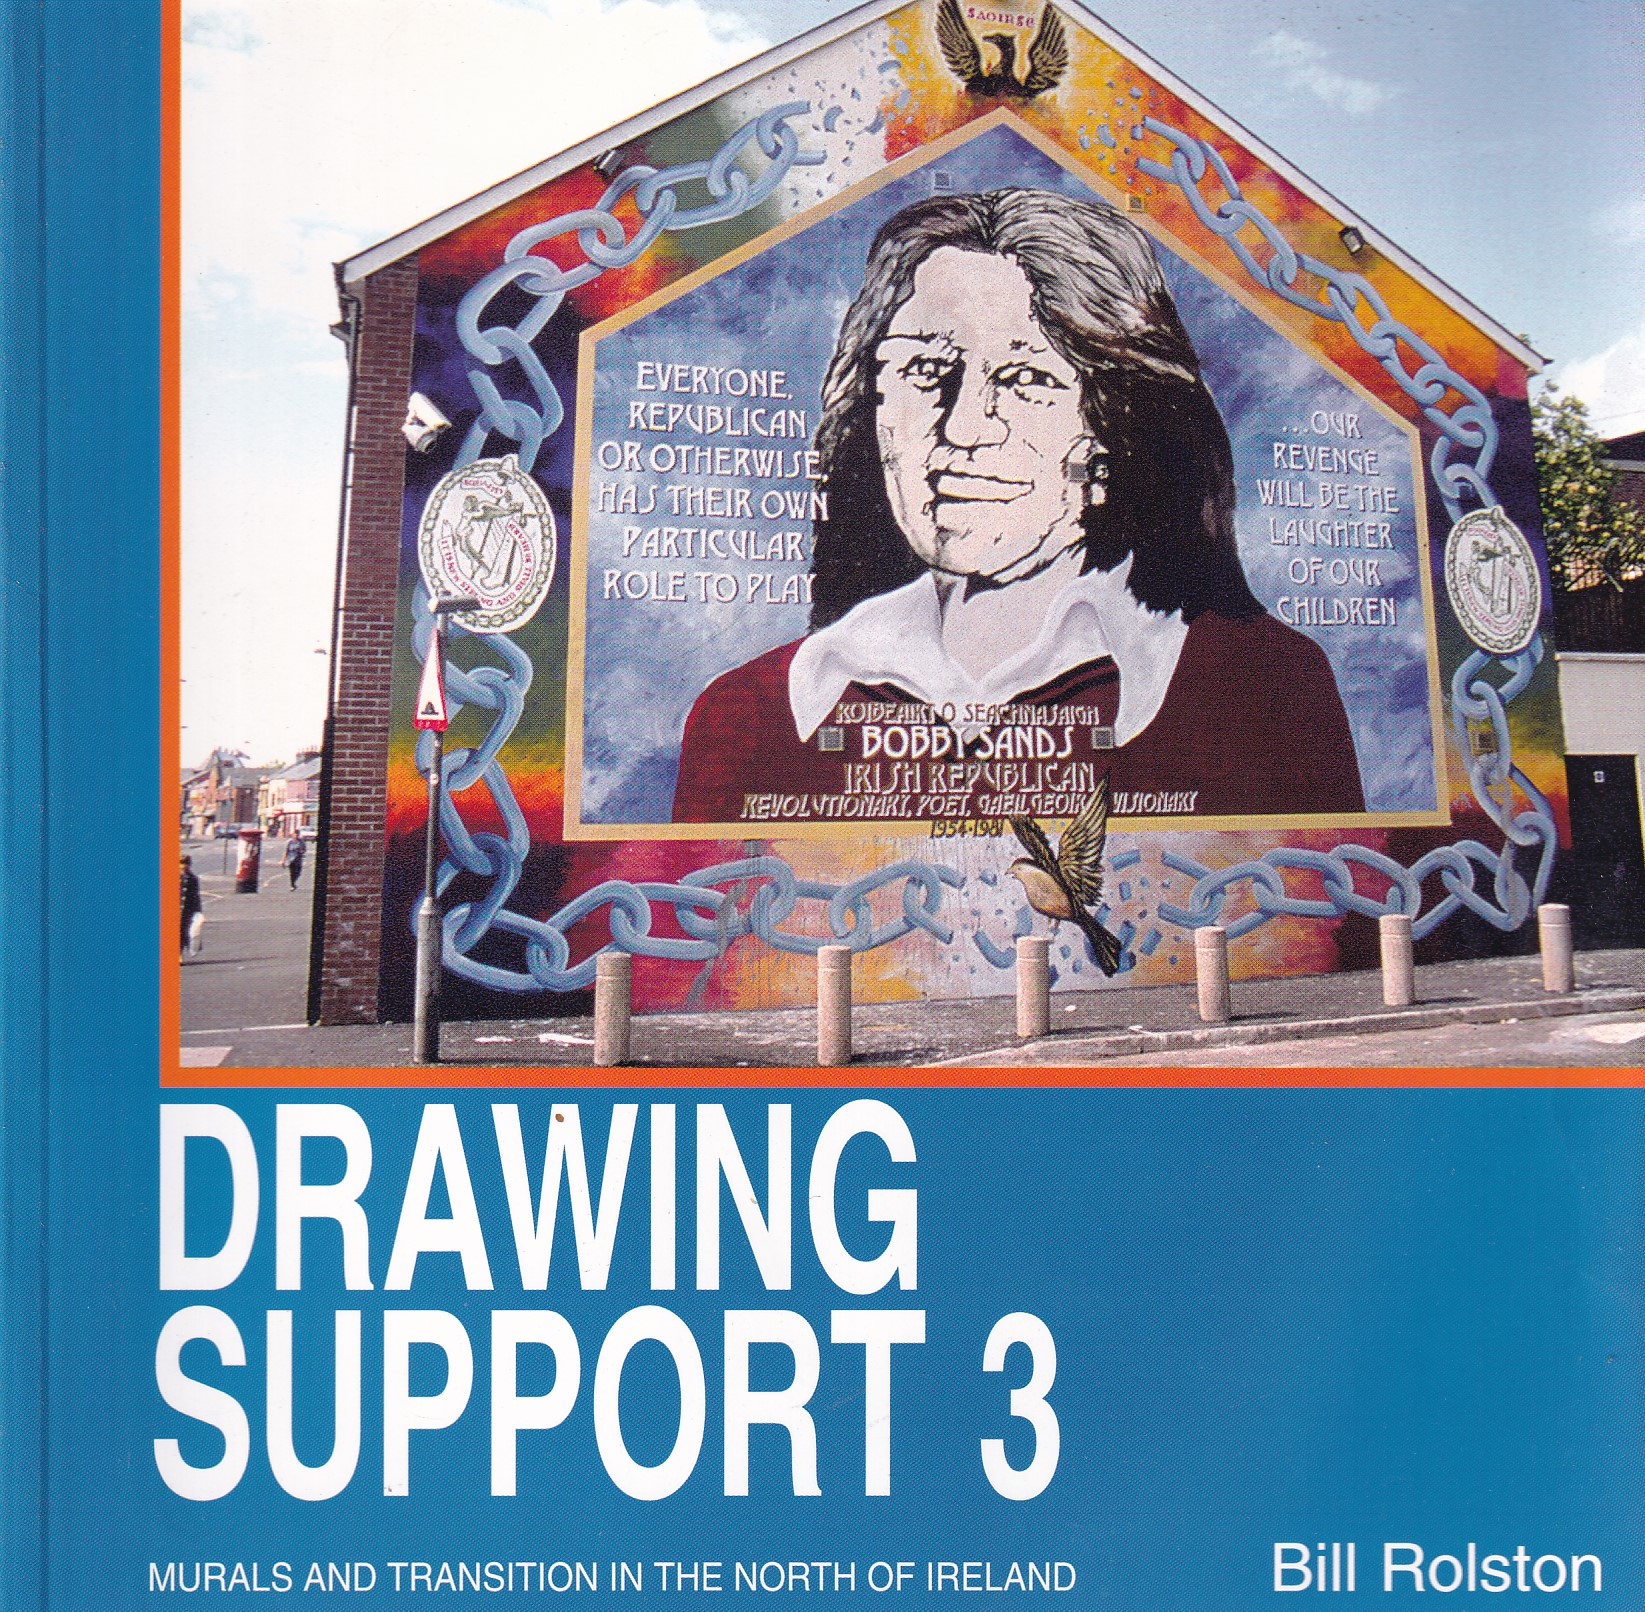 Drawing Support 3: Murals and Transition in the North of Ireland | Bill Rolston | Charlie Byrne's